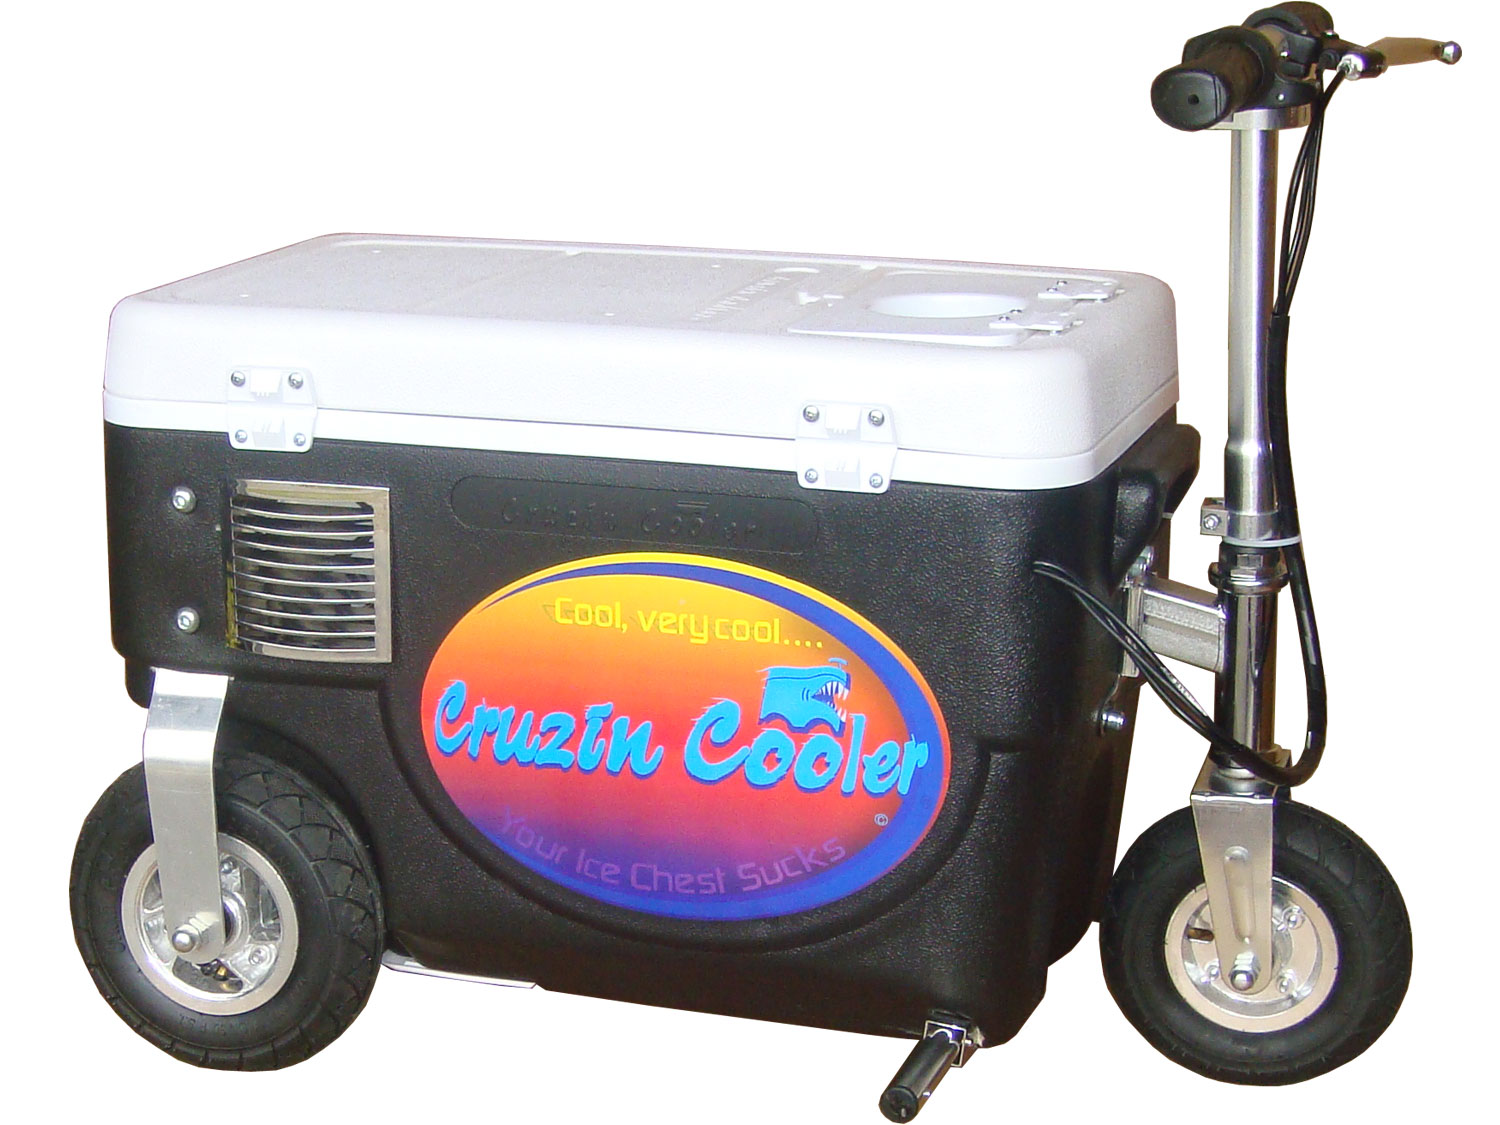 Cruzin Cooler Cooler Scooter 300w Black   Fitness & Sports   Wheeled